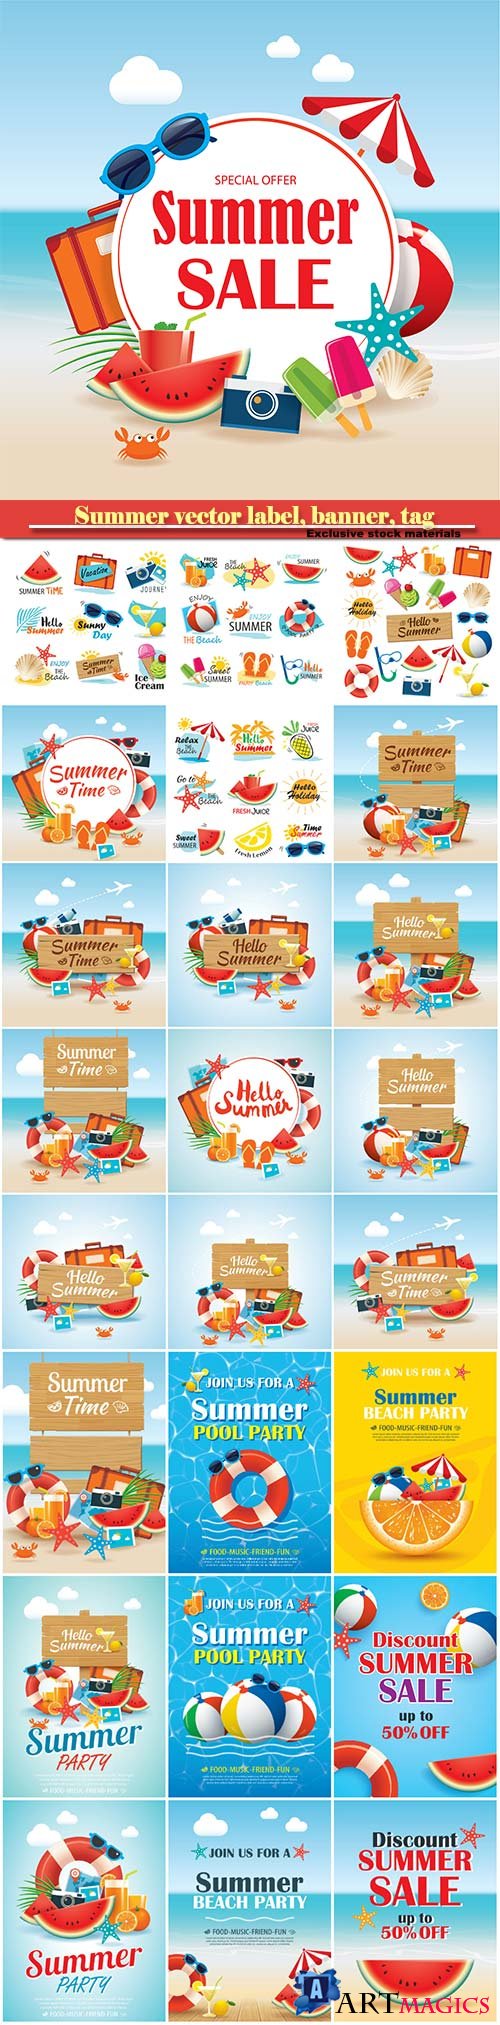 Summer vector label, banner, tag and elements background set